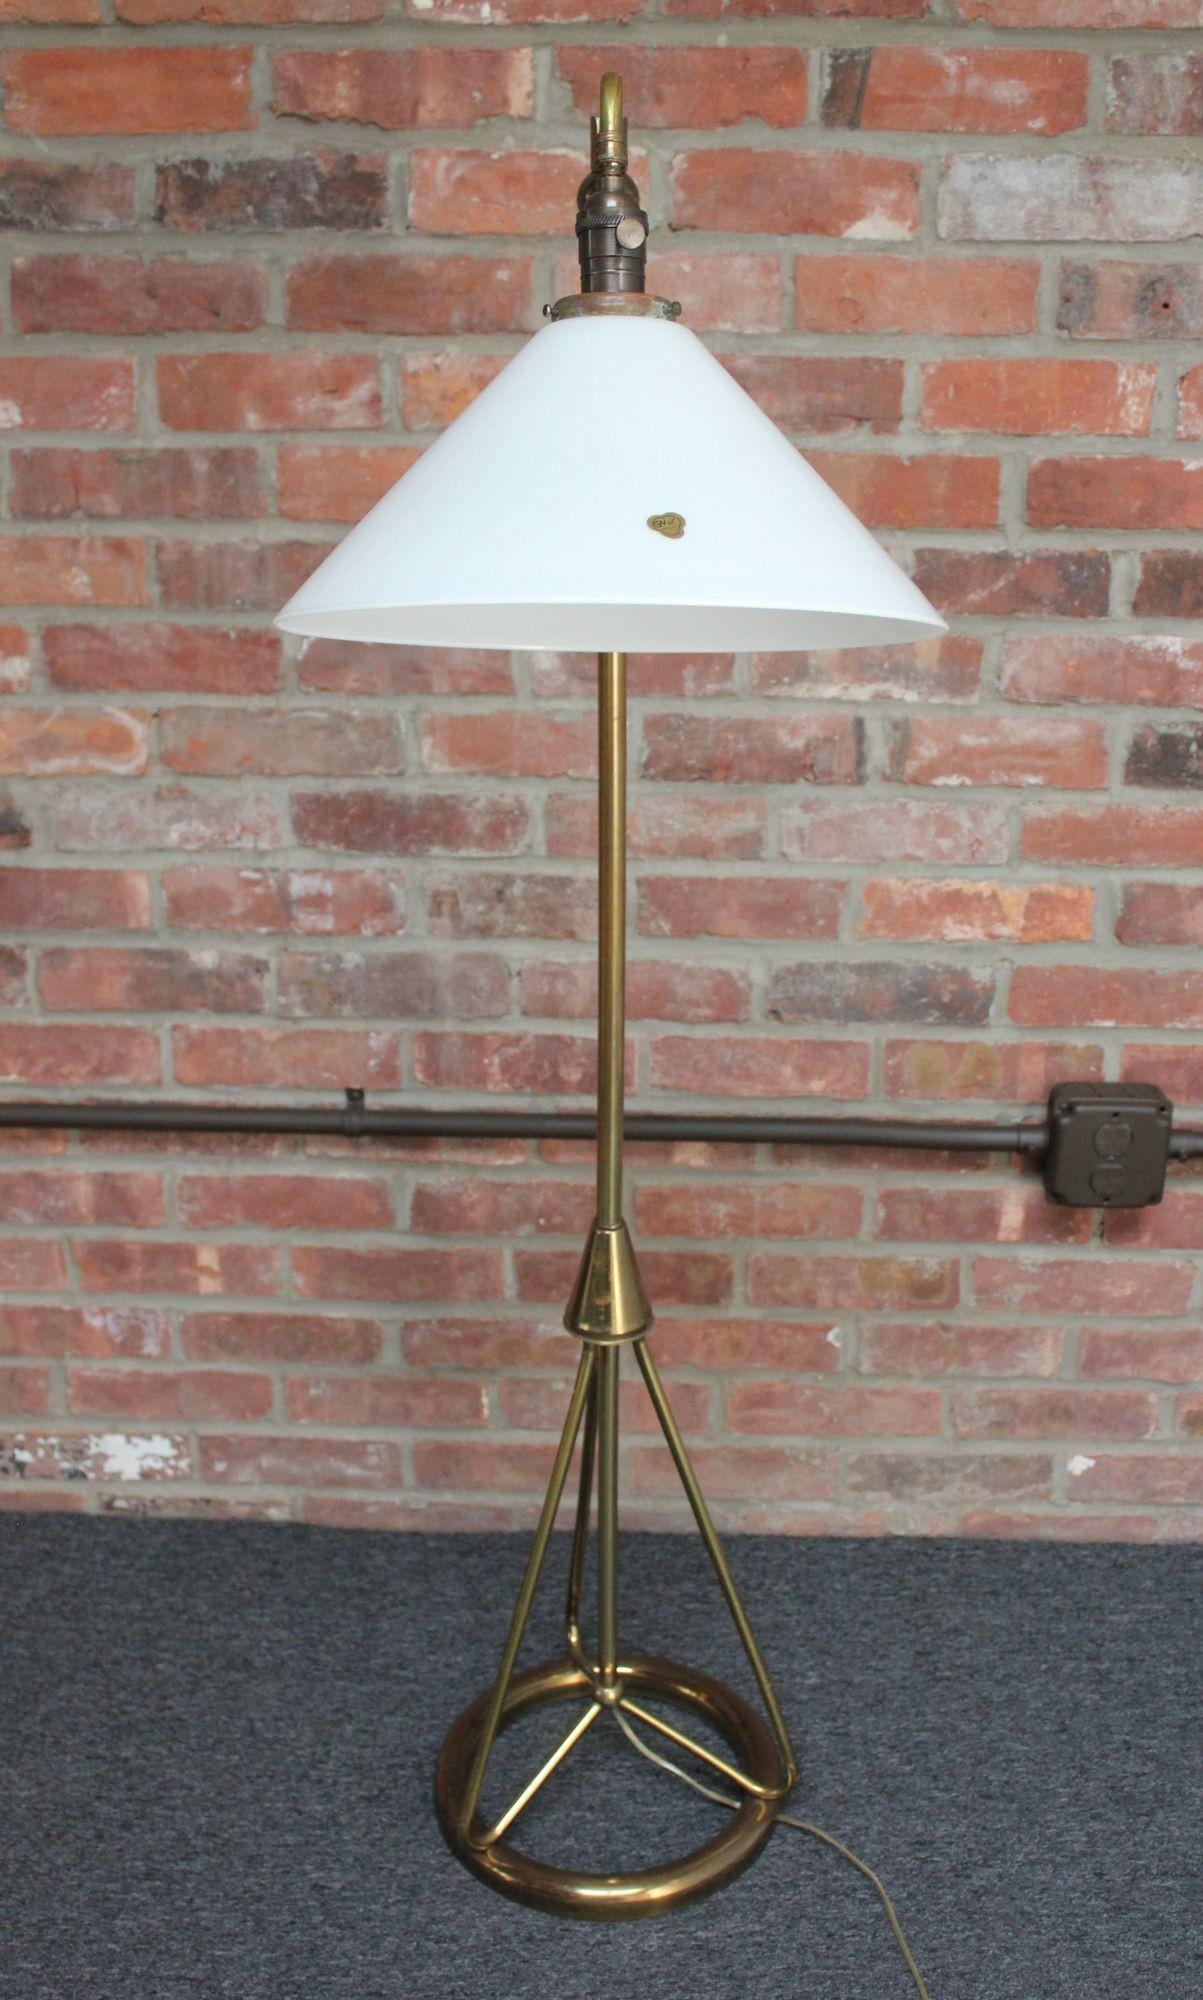 American Modern floor lamp with brass rod construction supported by a round tubular brass base (ca. 1950s).
Features a brass arm with chrome orb finial (decorative purposes only; arm does not adjust).
The French milk glass shade by CVV Vianne was a